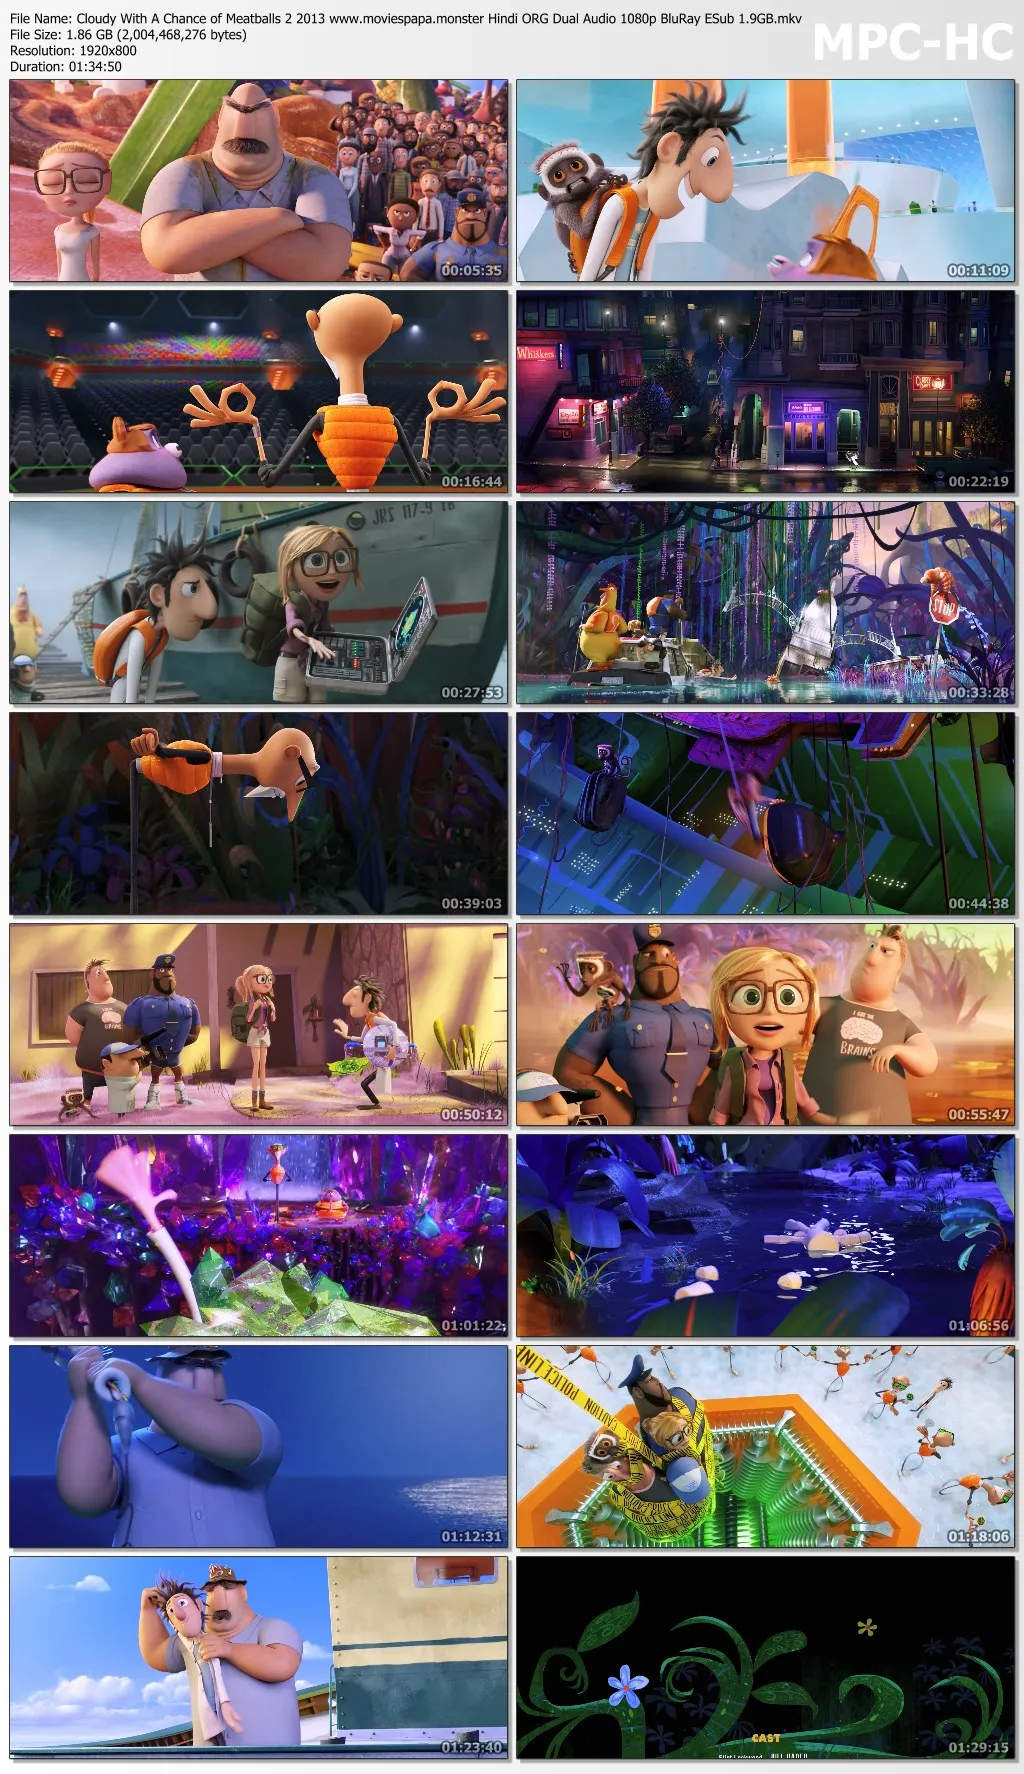 Cloudy With A Chance of Meatballs 2 2013 Hindi ORG Dual Audio 1080p | 720p | 480p BluRay ESub Download